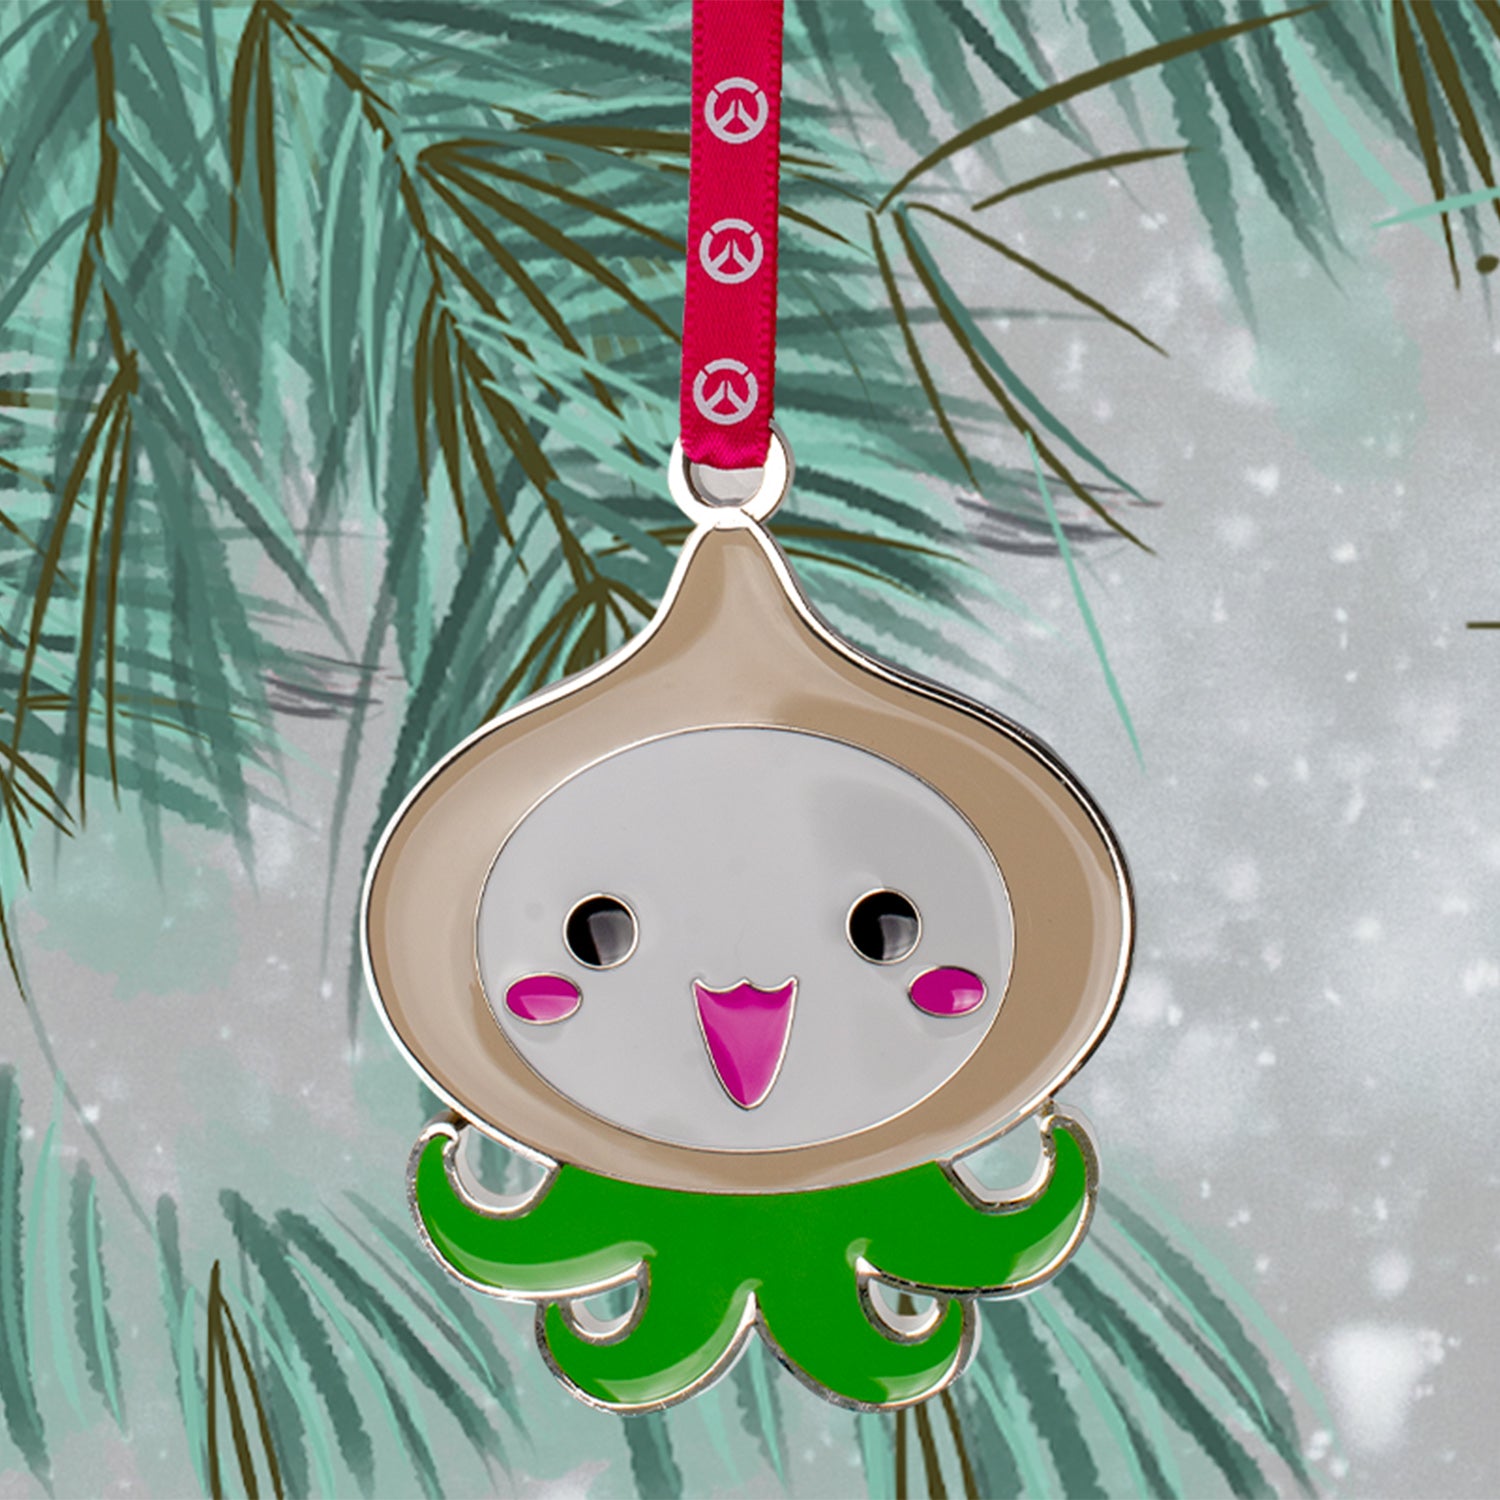 Overwatch 2 Pachimari Holiday Ornament - Close Up View